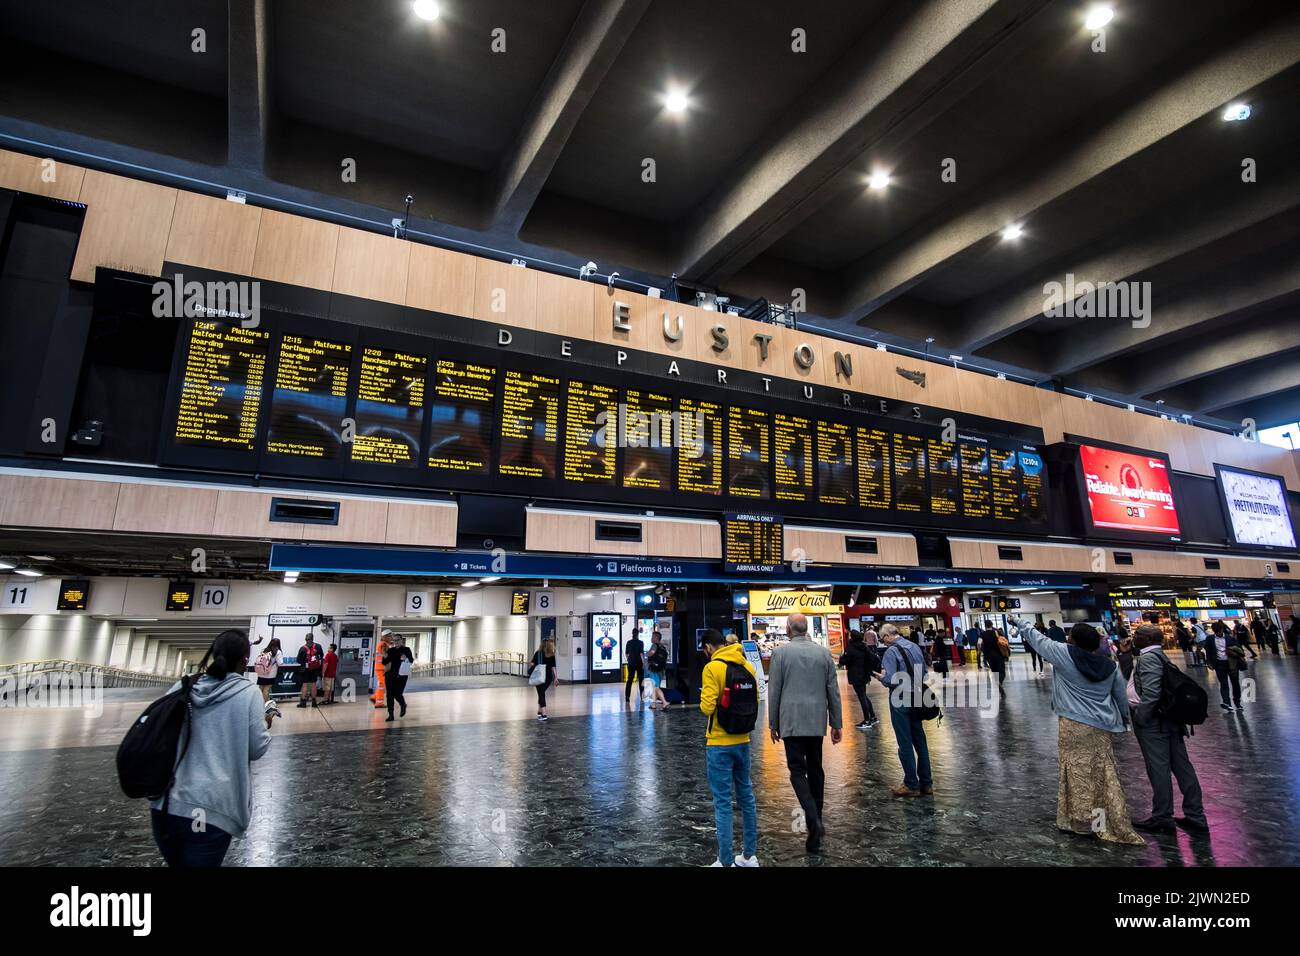 People look at the departure boards in Euston Station, London Stock Photo